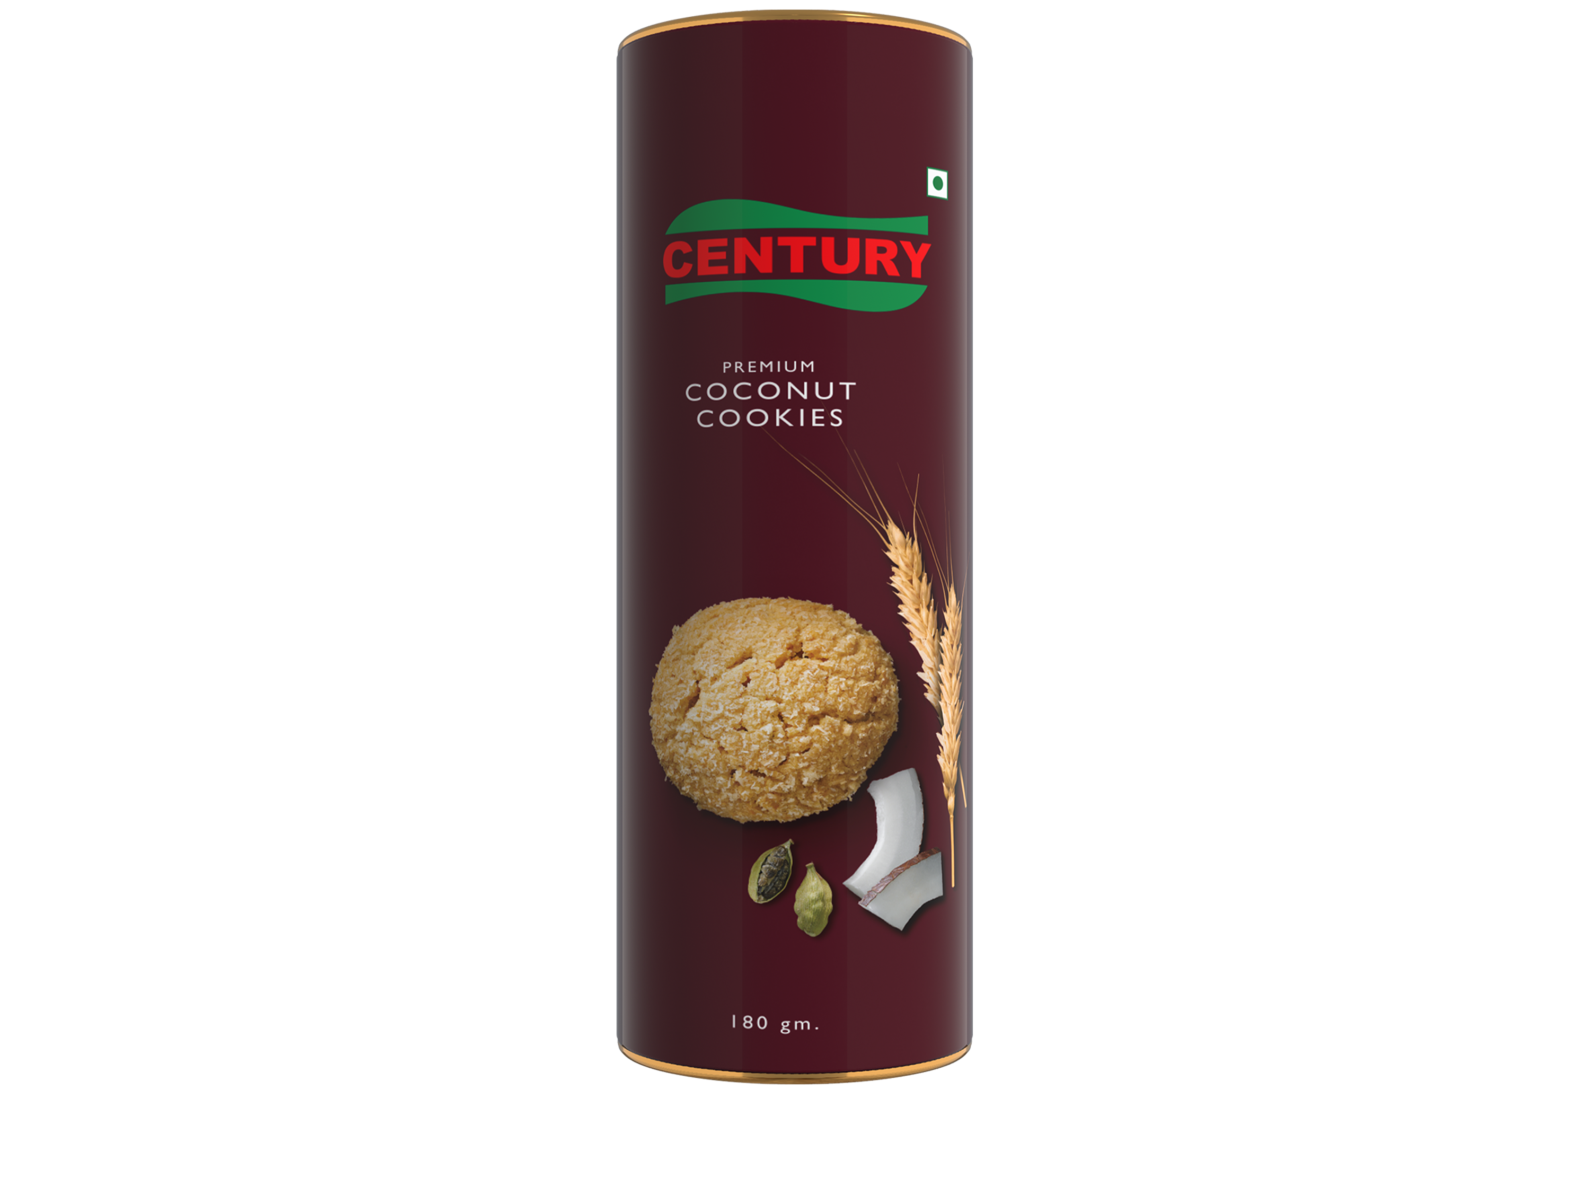 Century Coconut Cookies by Century Foods on Dribbble